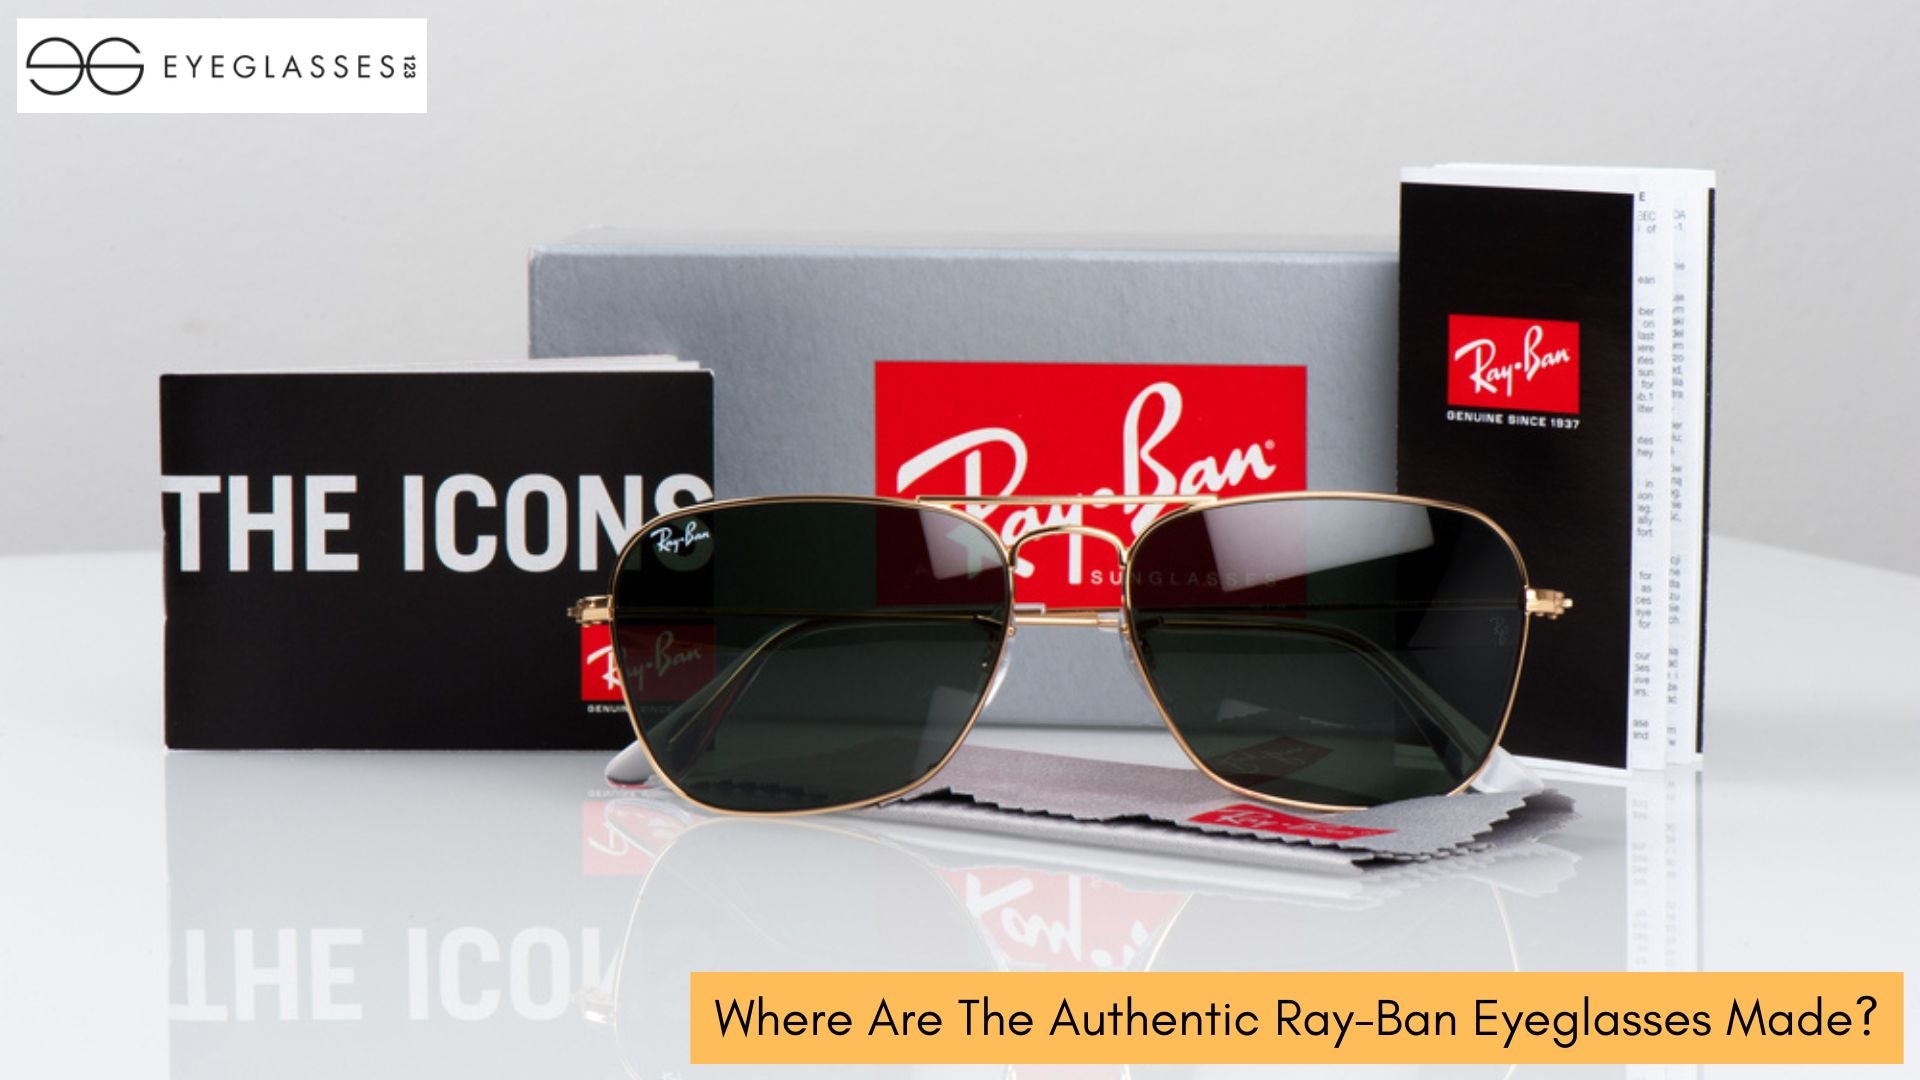 Where Are The Authentic Ray-Ban Eyeglasses Made?